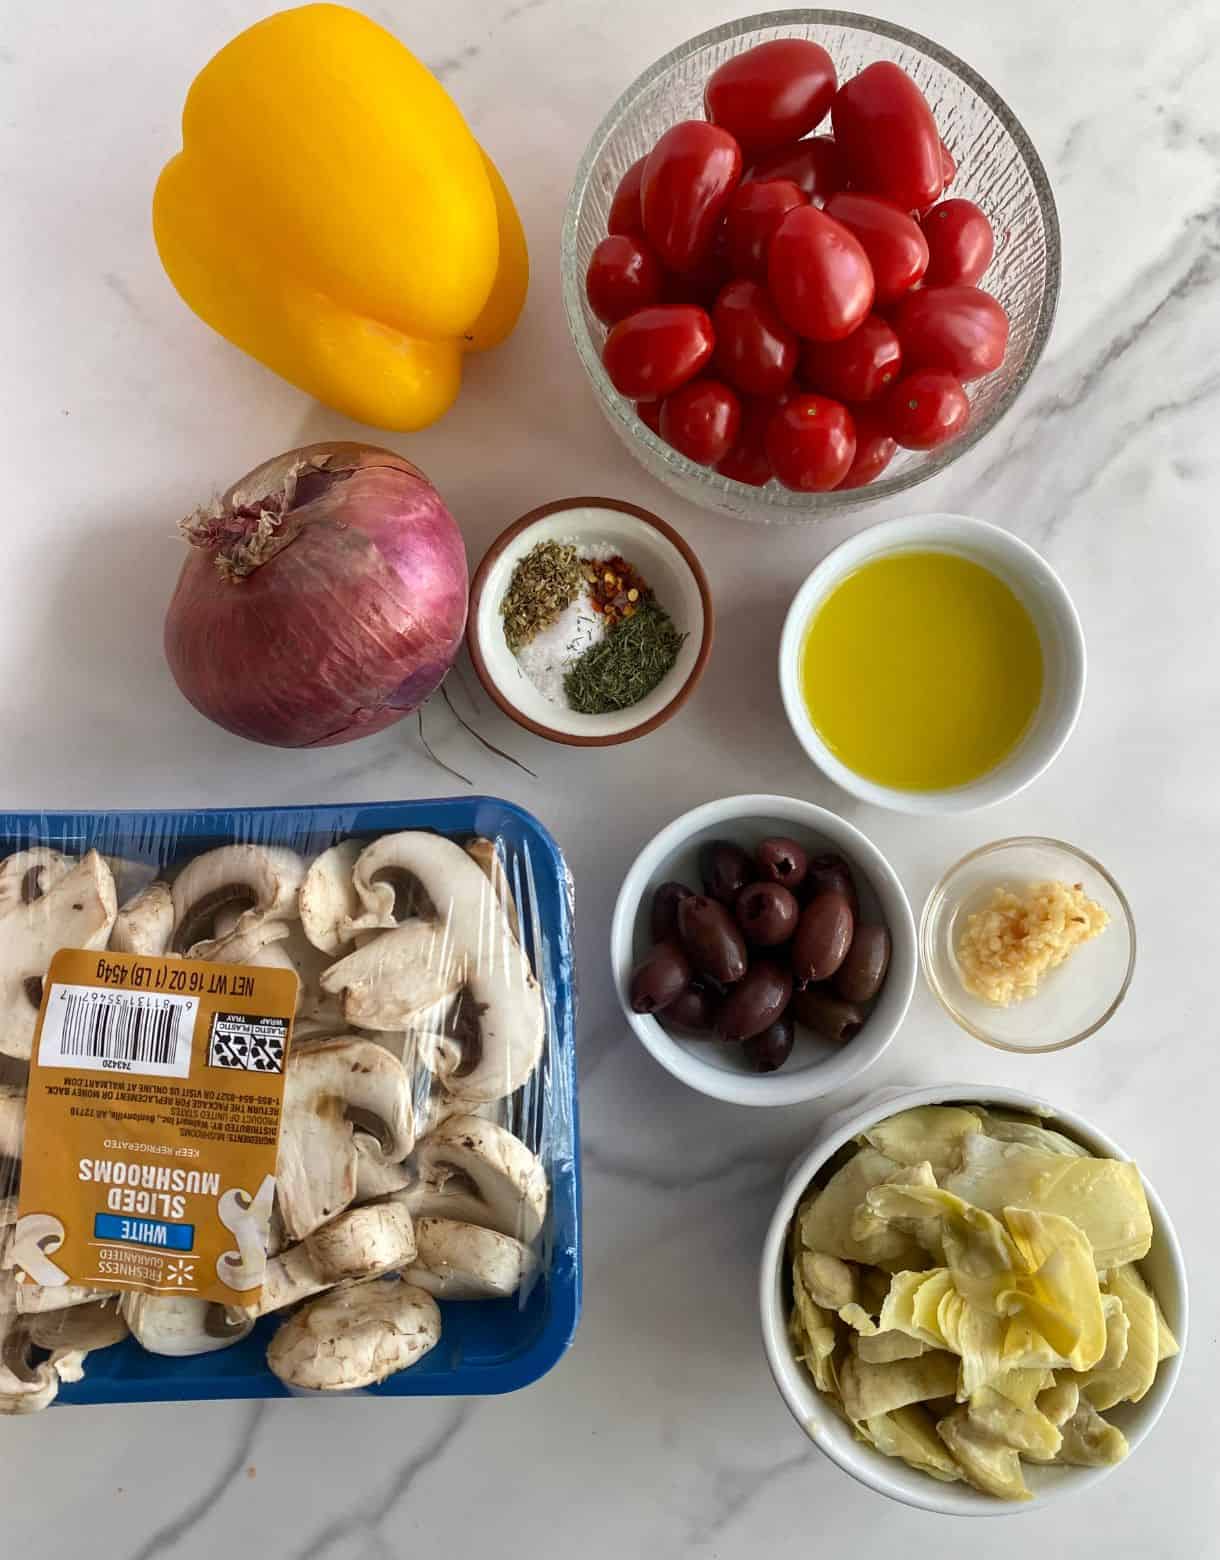 Ingredients for Mediterranean Roasted Vegetables. Grape tomatoes, bell pepper, red onion, salt, pepper, herbs, olive oil, minced garlic, olives, mushrooms and artichoke hearts.